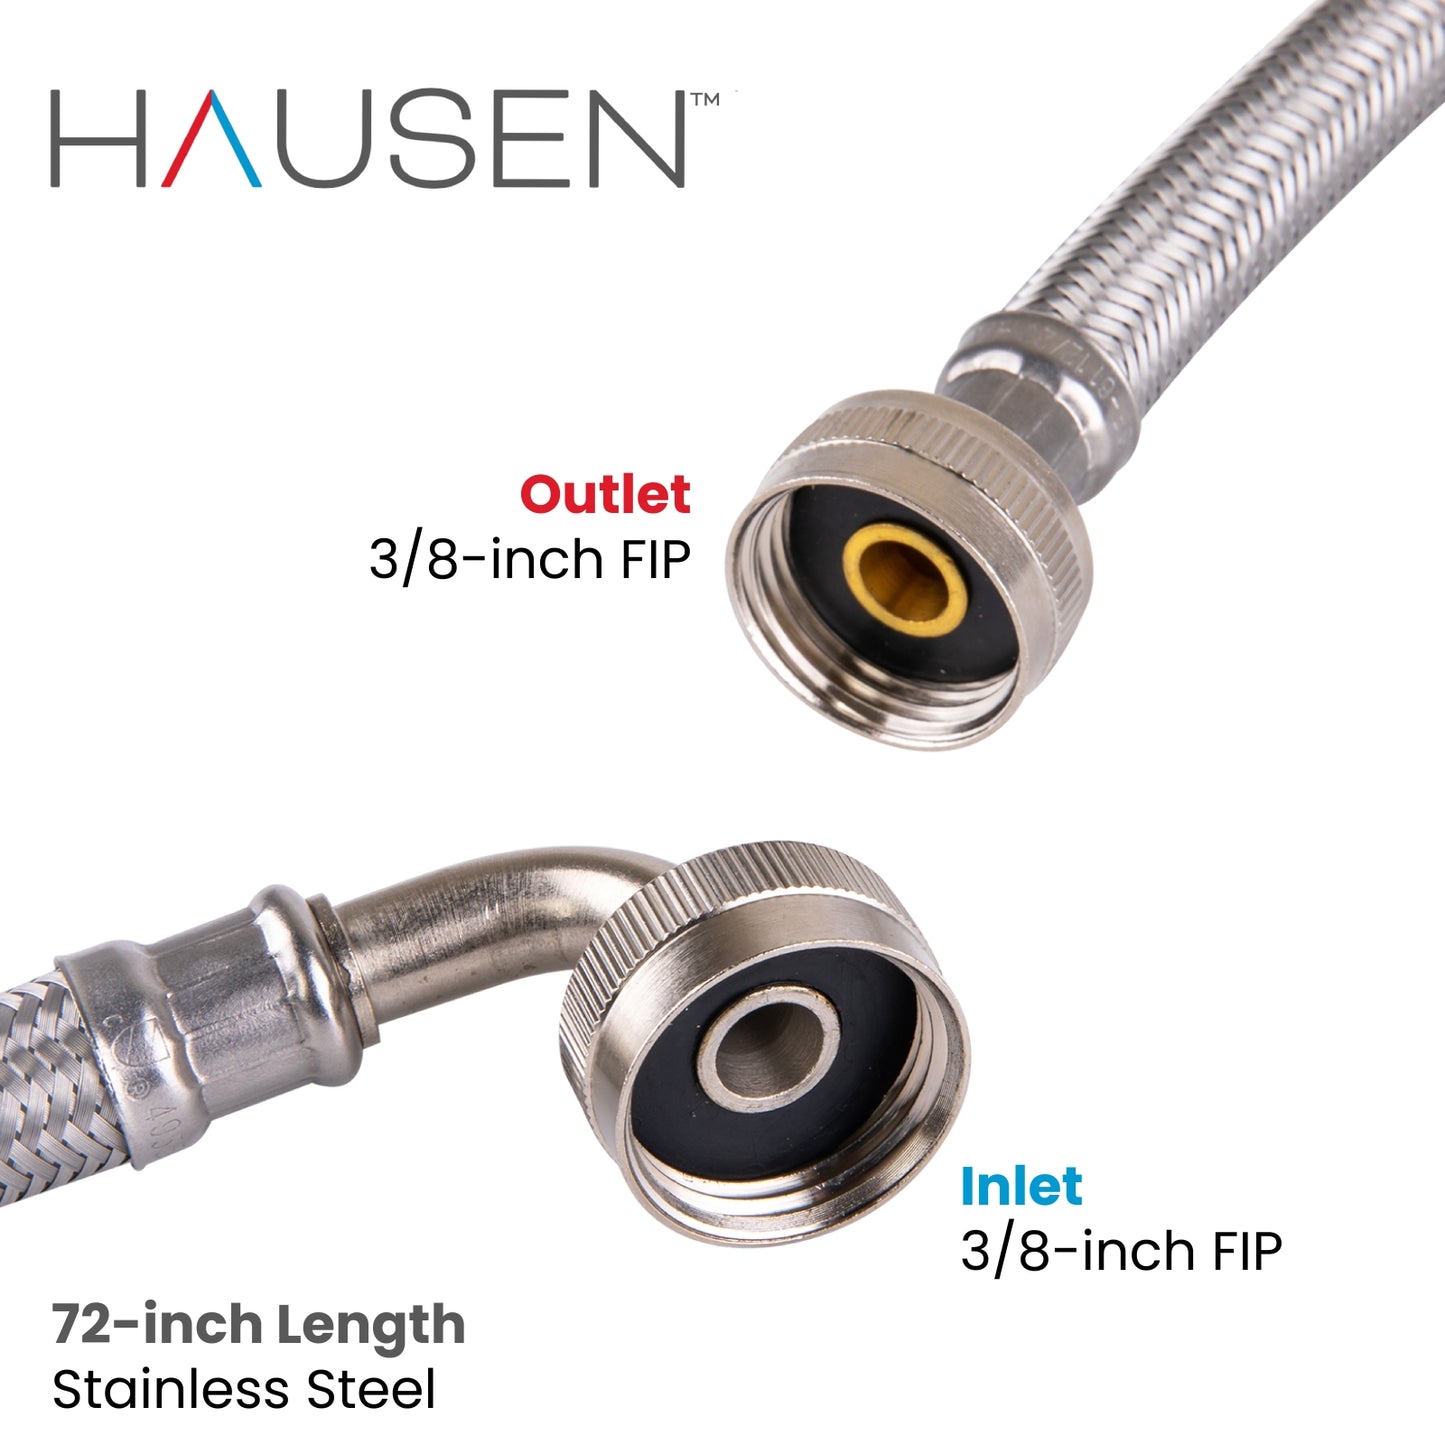 Hausen 3/4-inch FHT (Female Hose Thread) x 3/4-inch FHT (Female Hose Thread) x 72-inch (6-Feet) Length Stainless Steel Steam Dryer Kit with Elbow; Lead Free; Compatible with Most Steam Dryers, 1-Pack